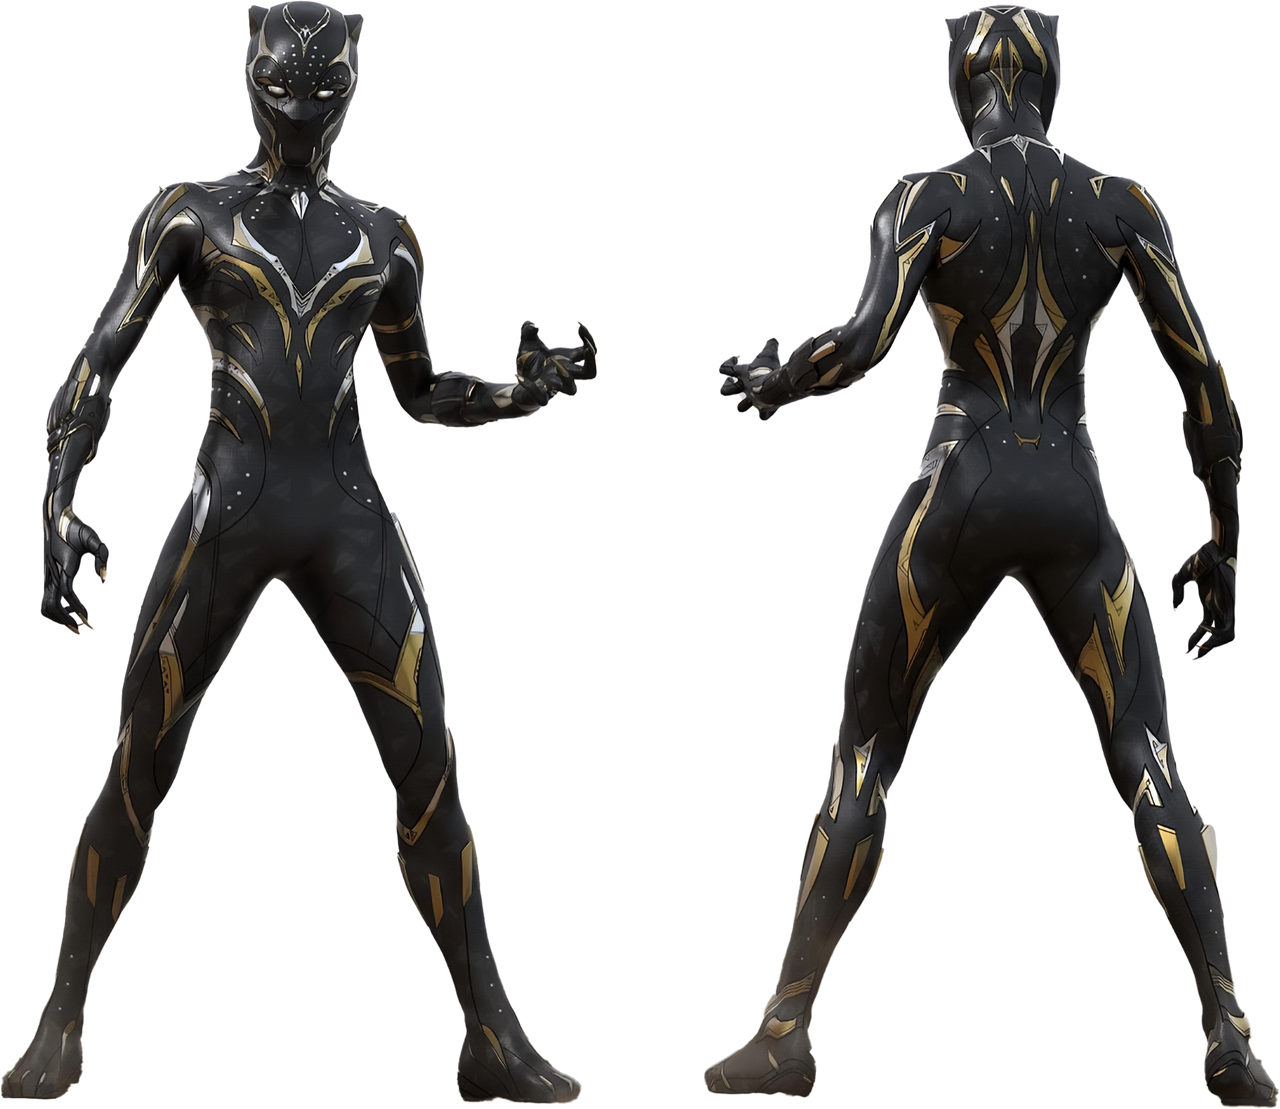 RP Shuir/ Black Panther (RS/RP GE) by Innnna on DeviantArt